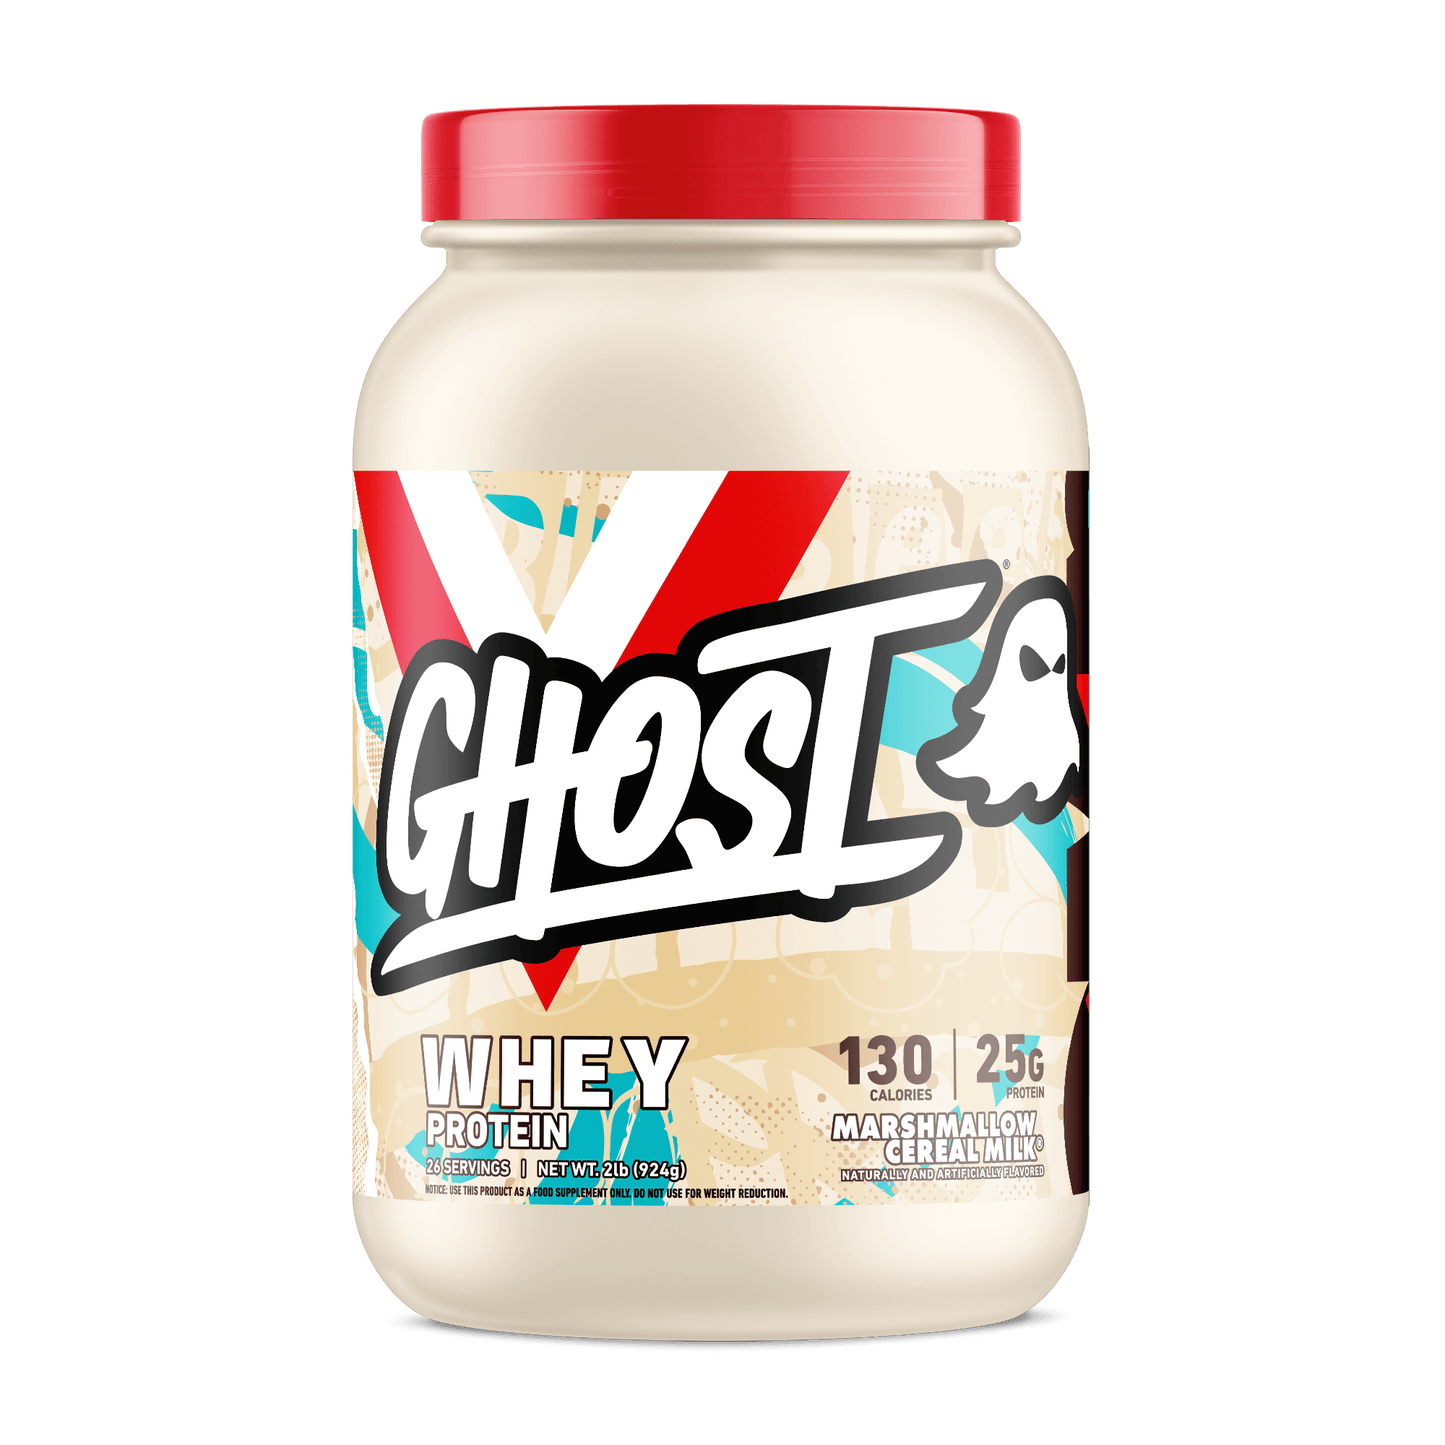 Ghost Whey Protein Size: 907g Flavour: Marshmallow Cereal Milk